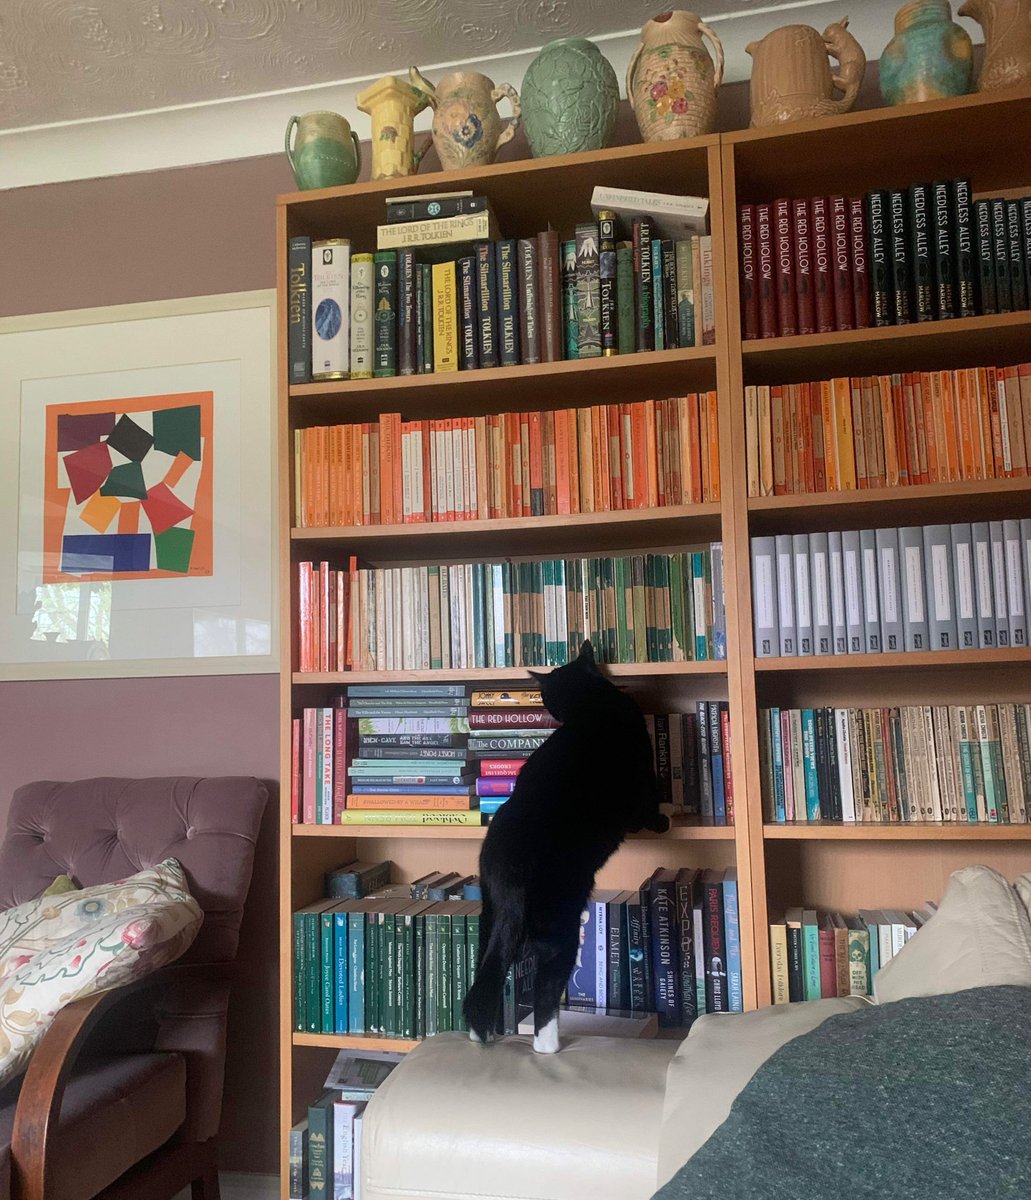 Magpie the cat choosing classic crime fiction. (And looking like the model for the cover of Richard Osman’s new book!)